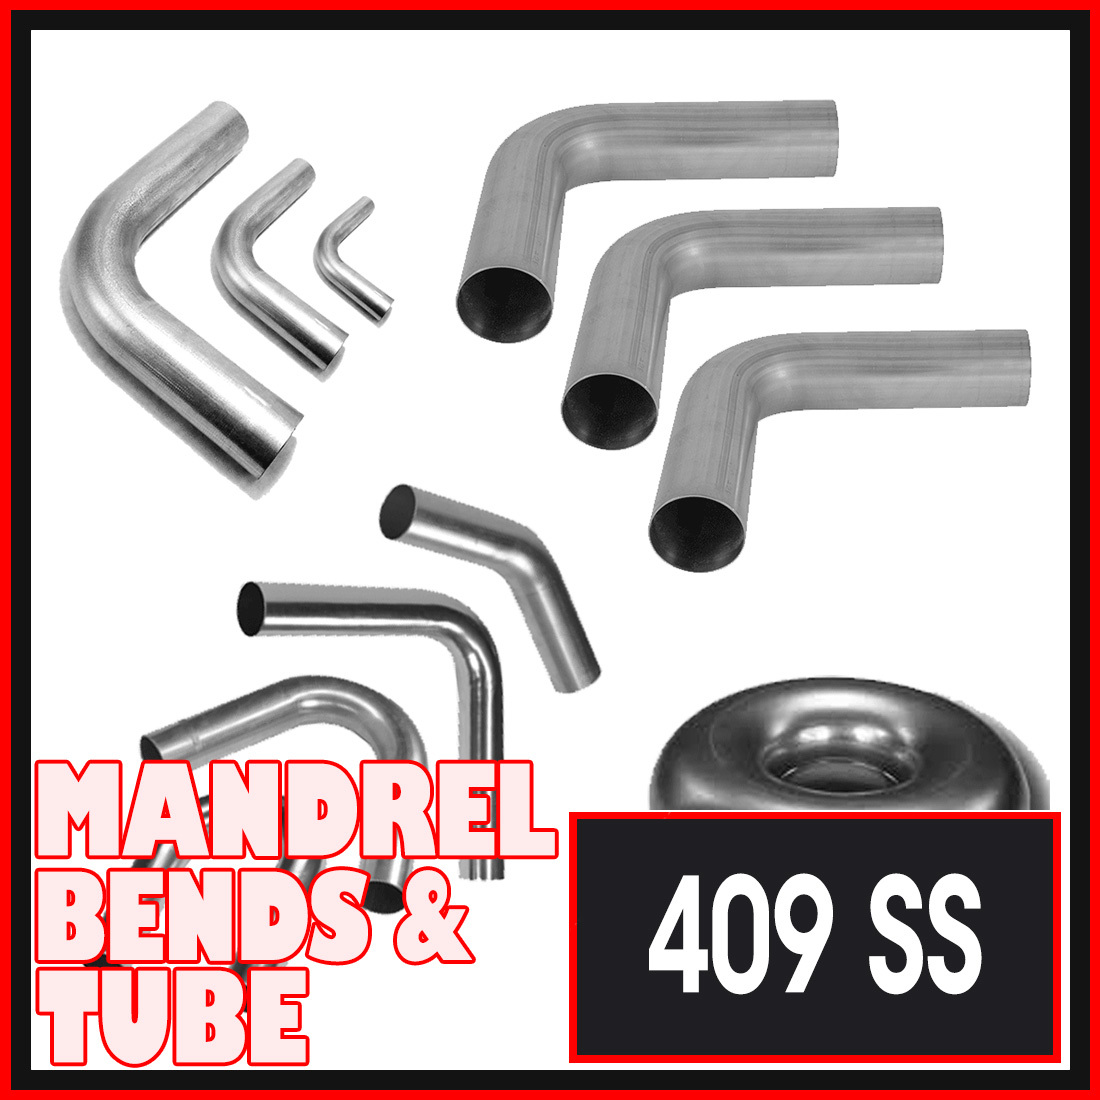 3" 409 Stainless Steel Mandrel Bends and Exhaust Pipe image